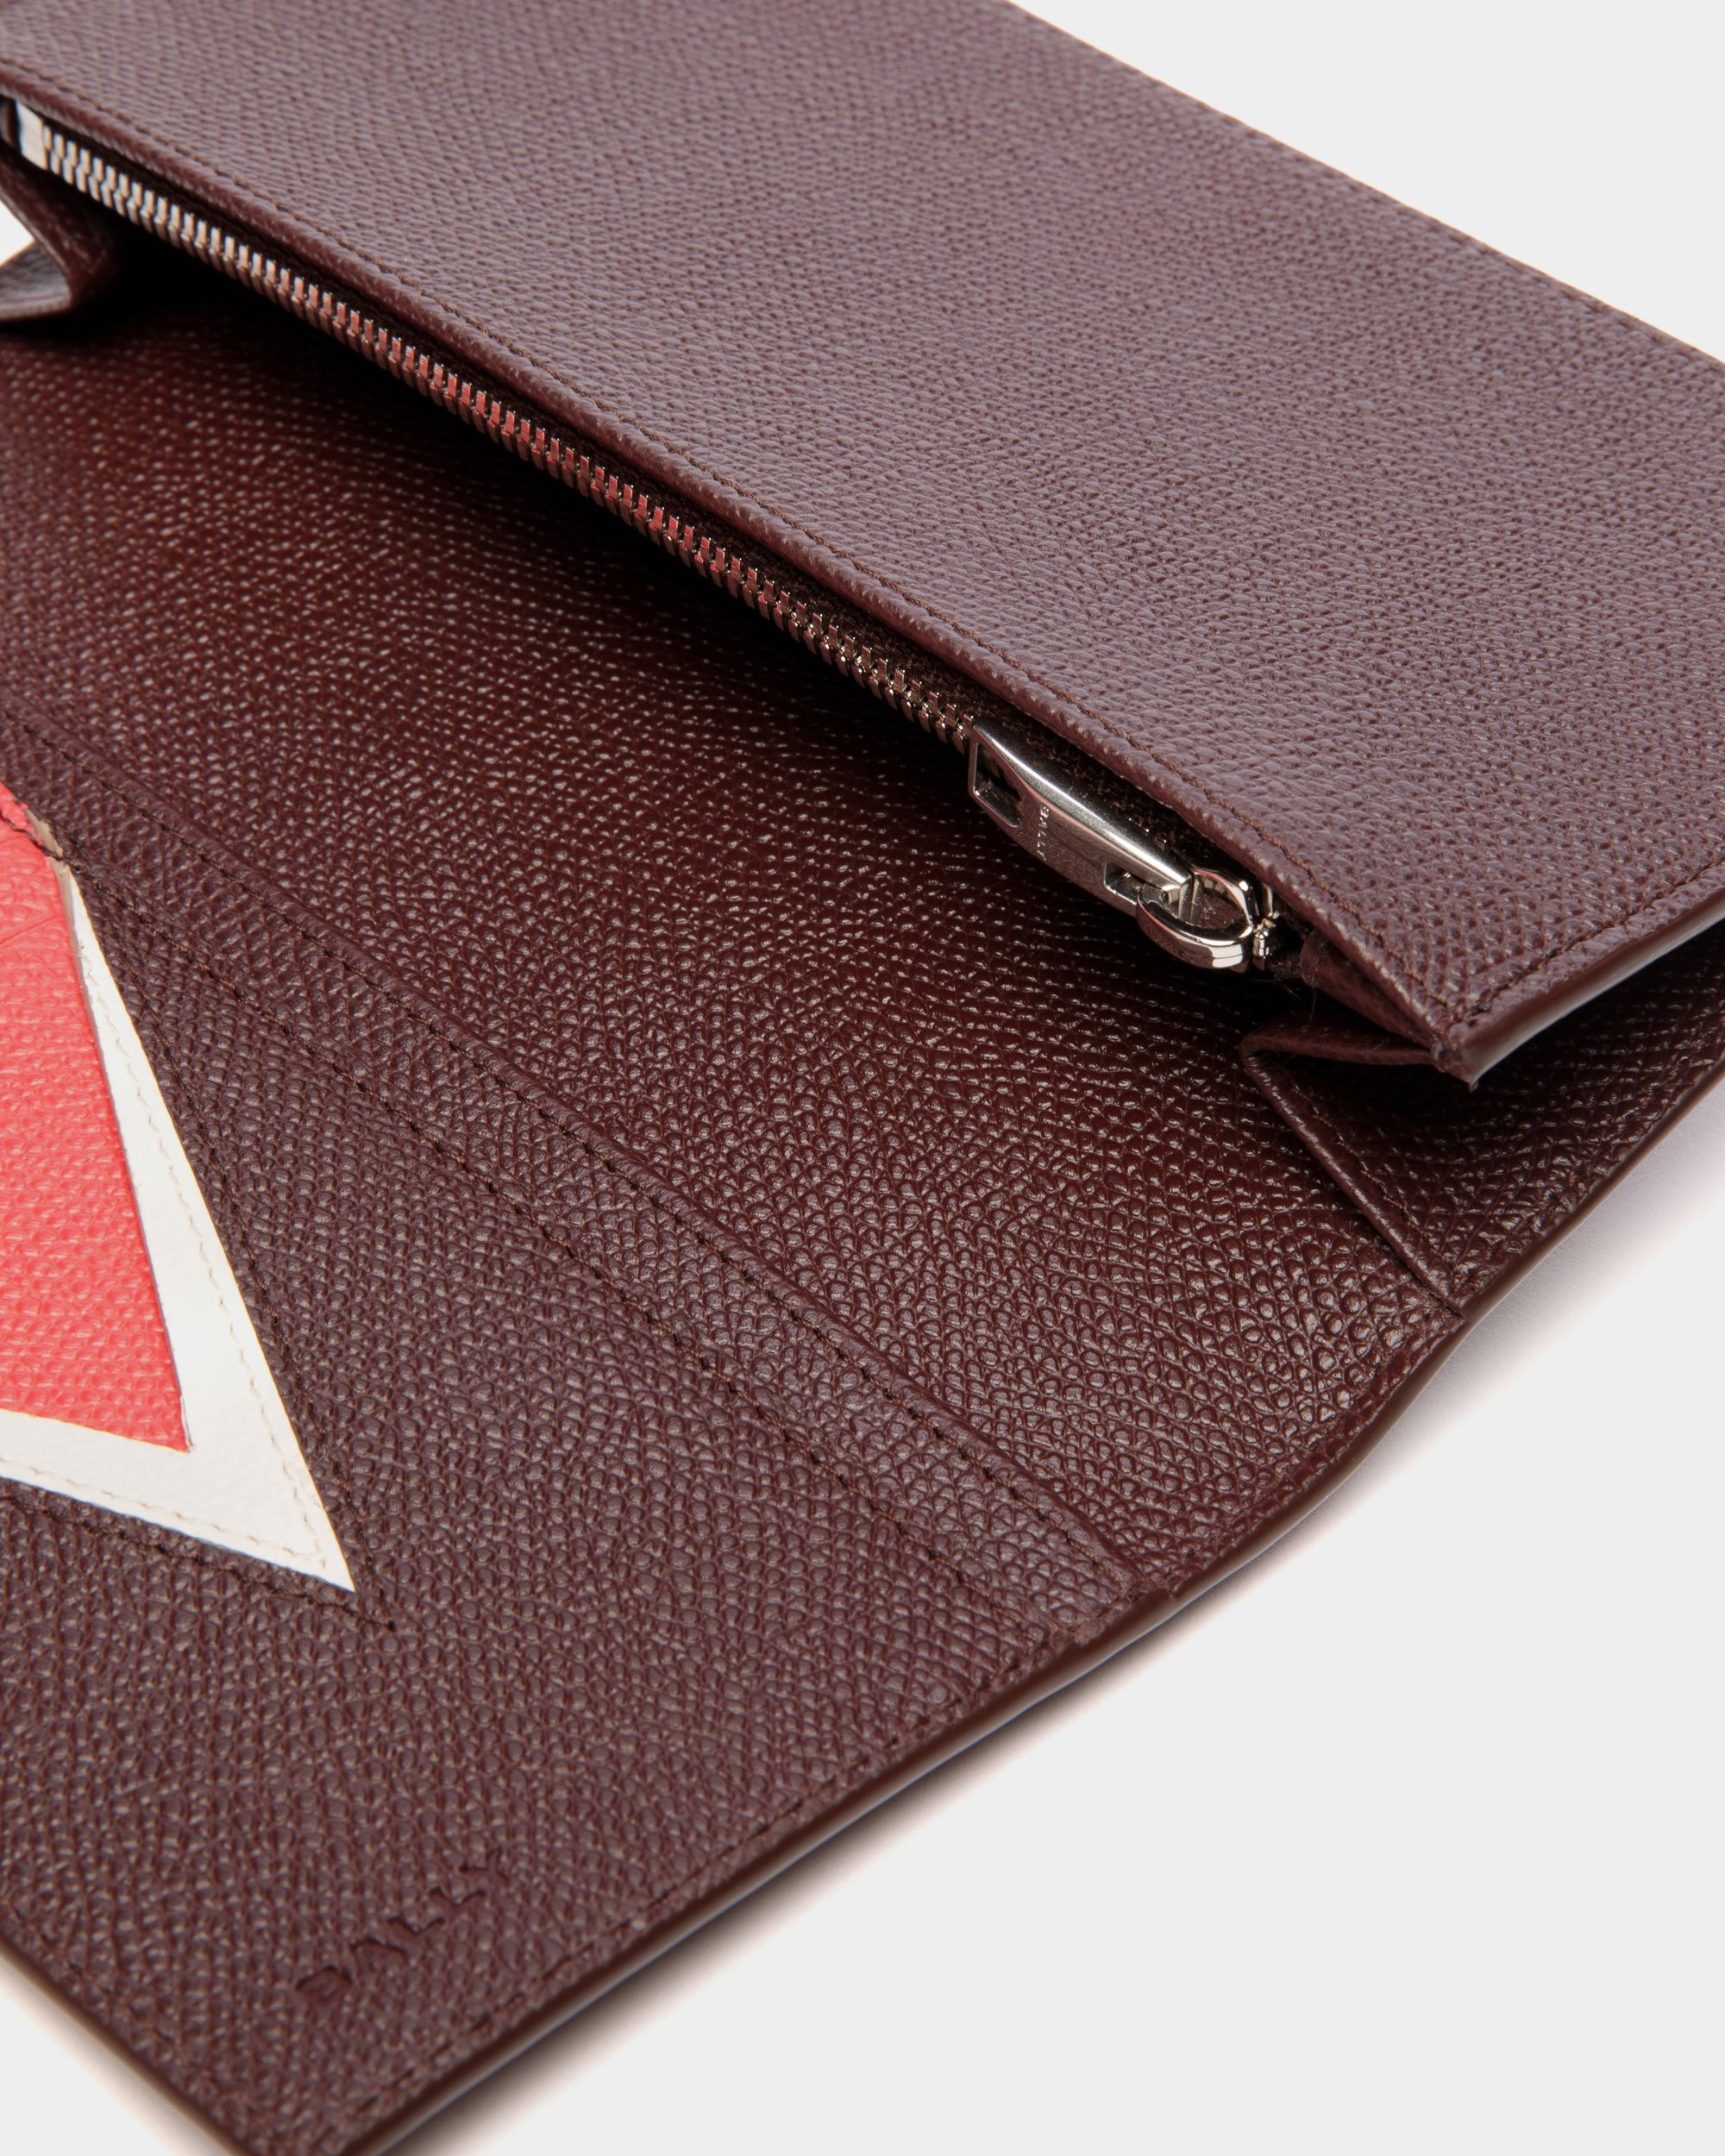 Flag | Men's Continental Wallet in Chestnut Brown Grained Leather | Bally | Still Life Detail